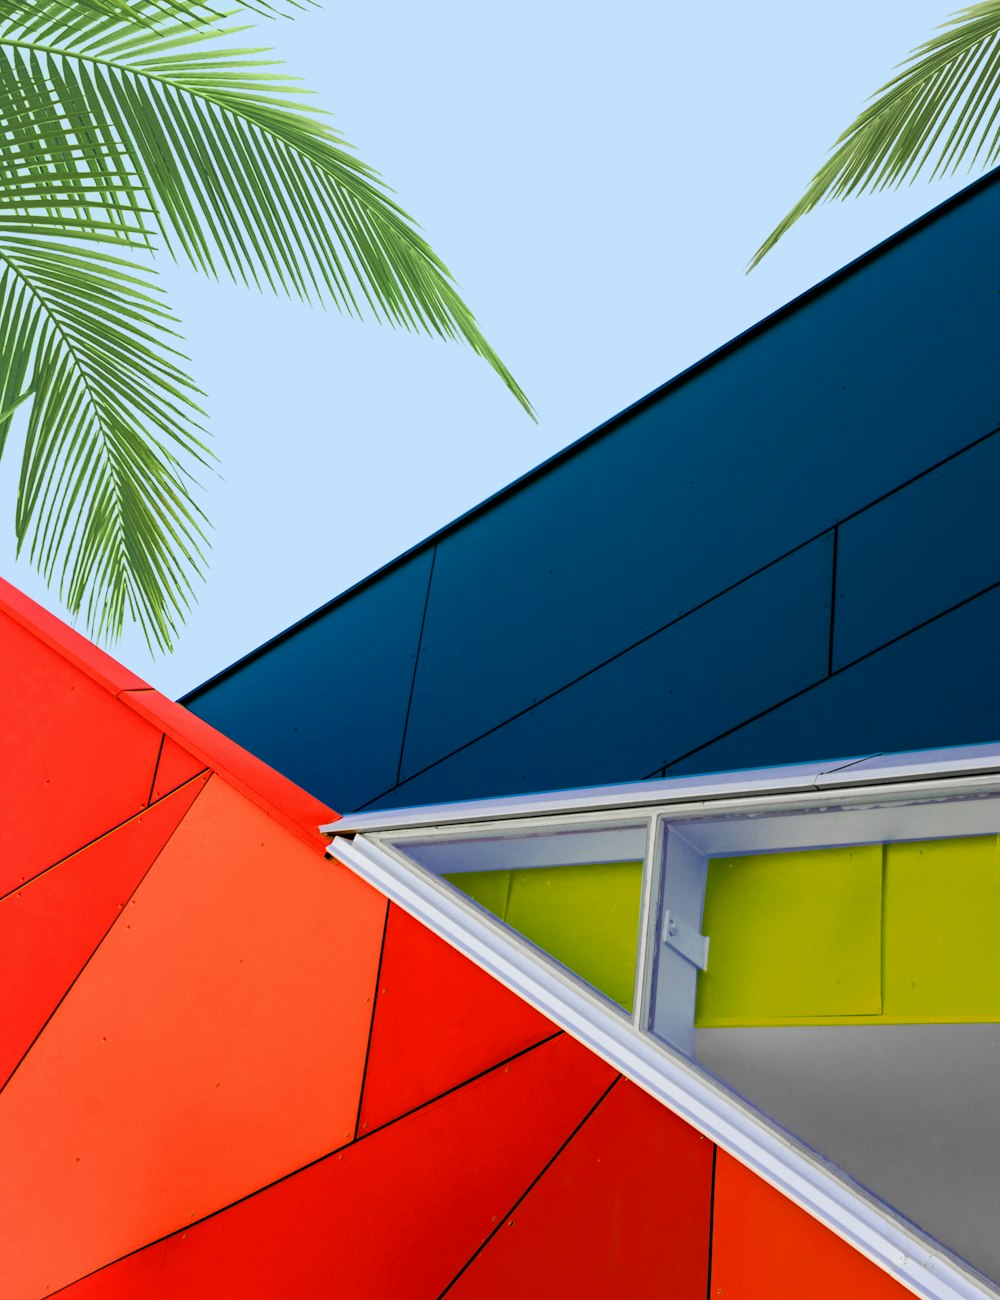 red, blue, and green glass building near palm trees